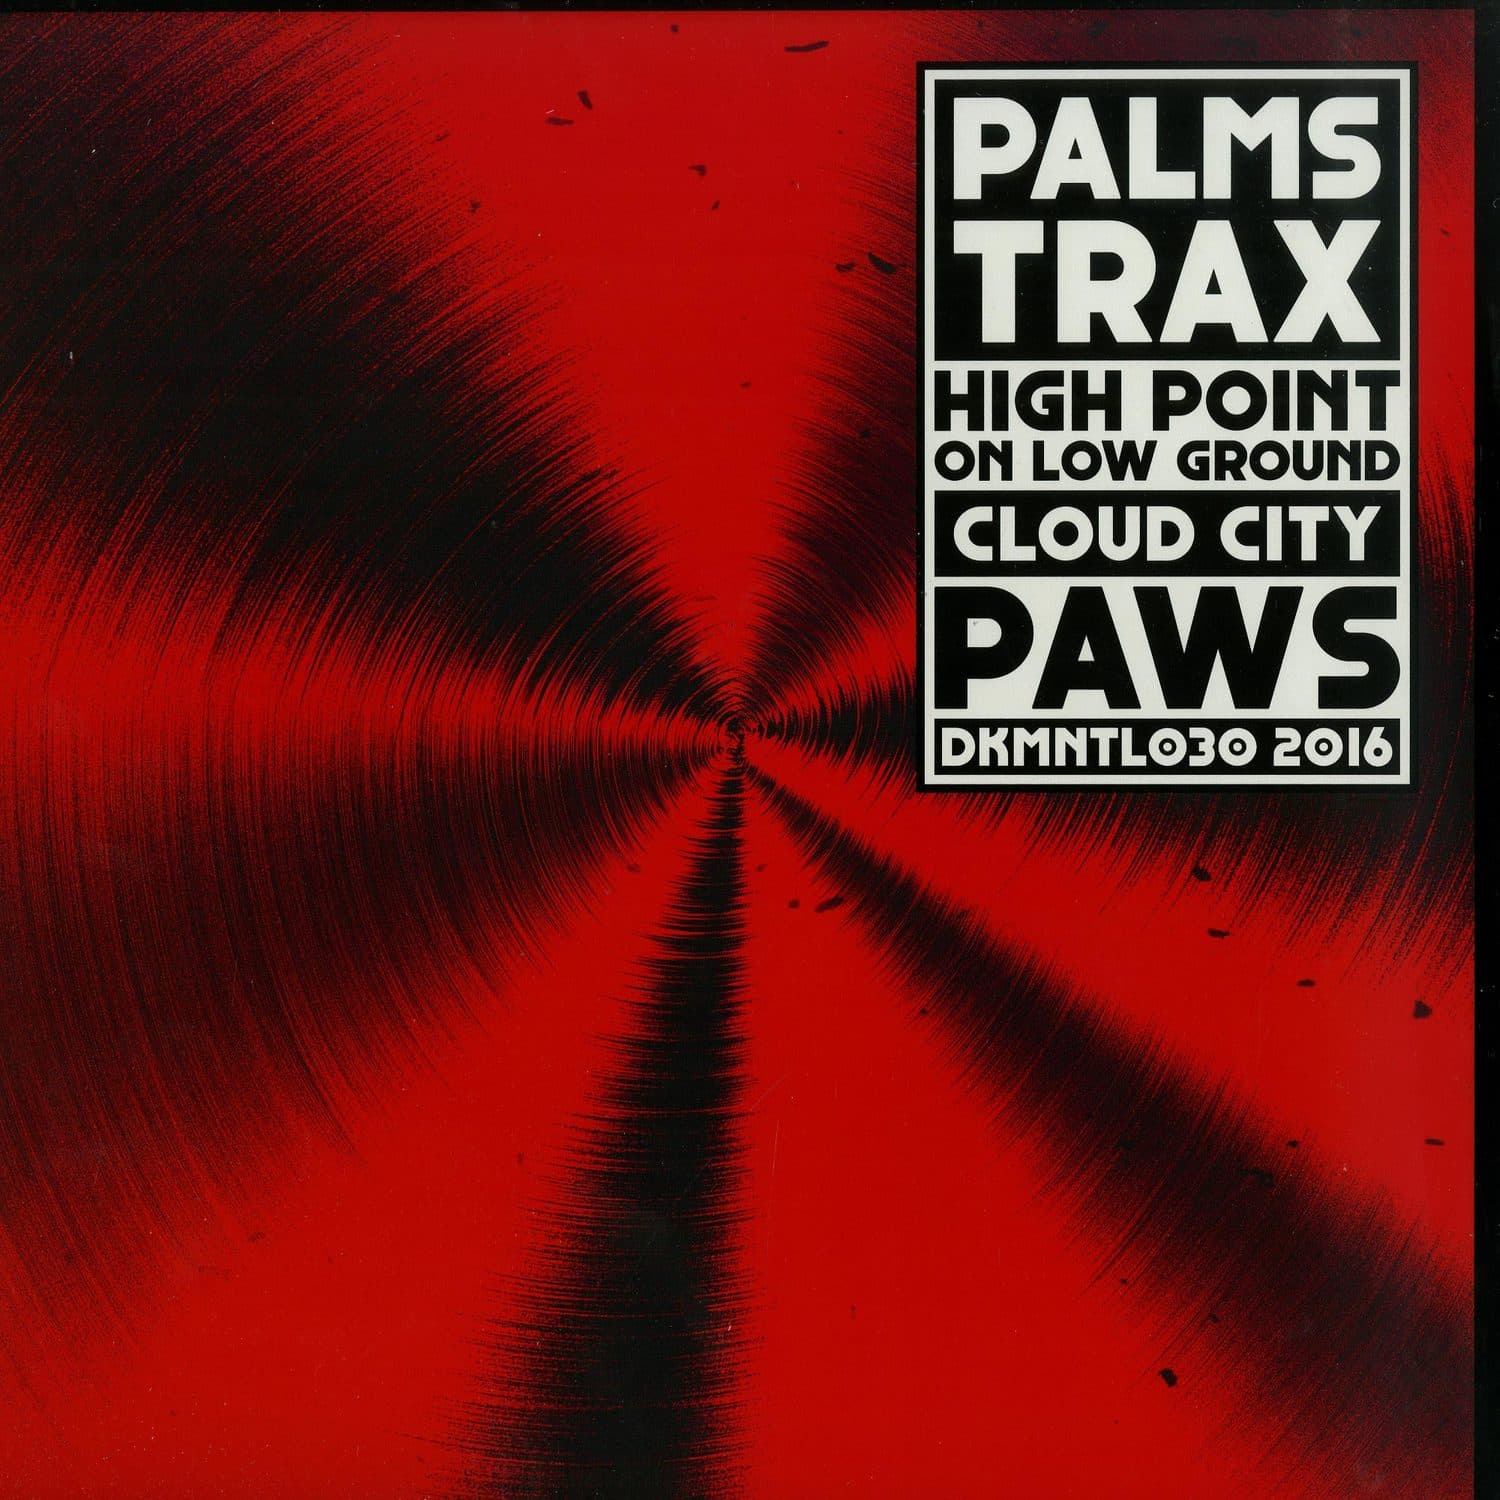 Palms Trax - HIGH POINT ON LOW GROUND